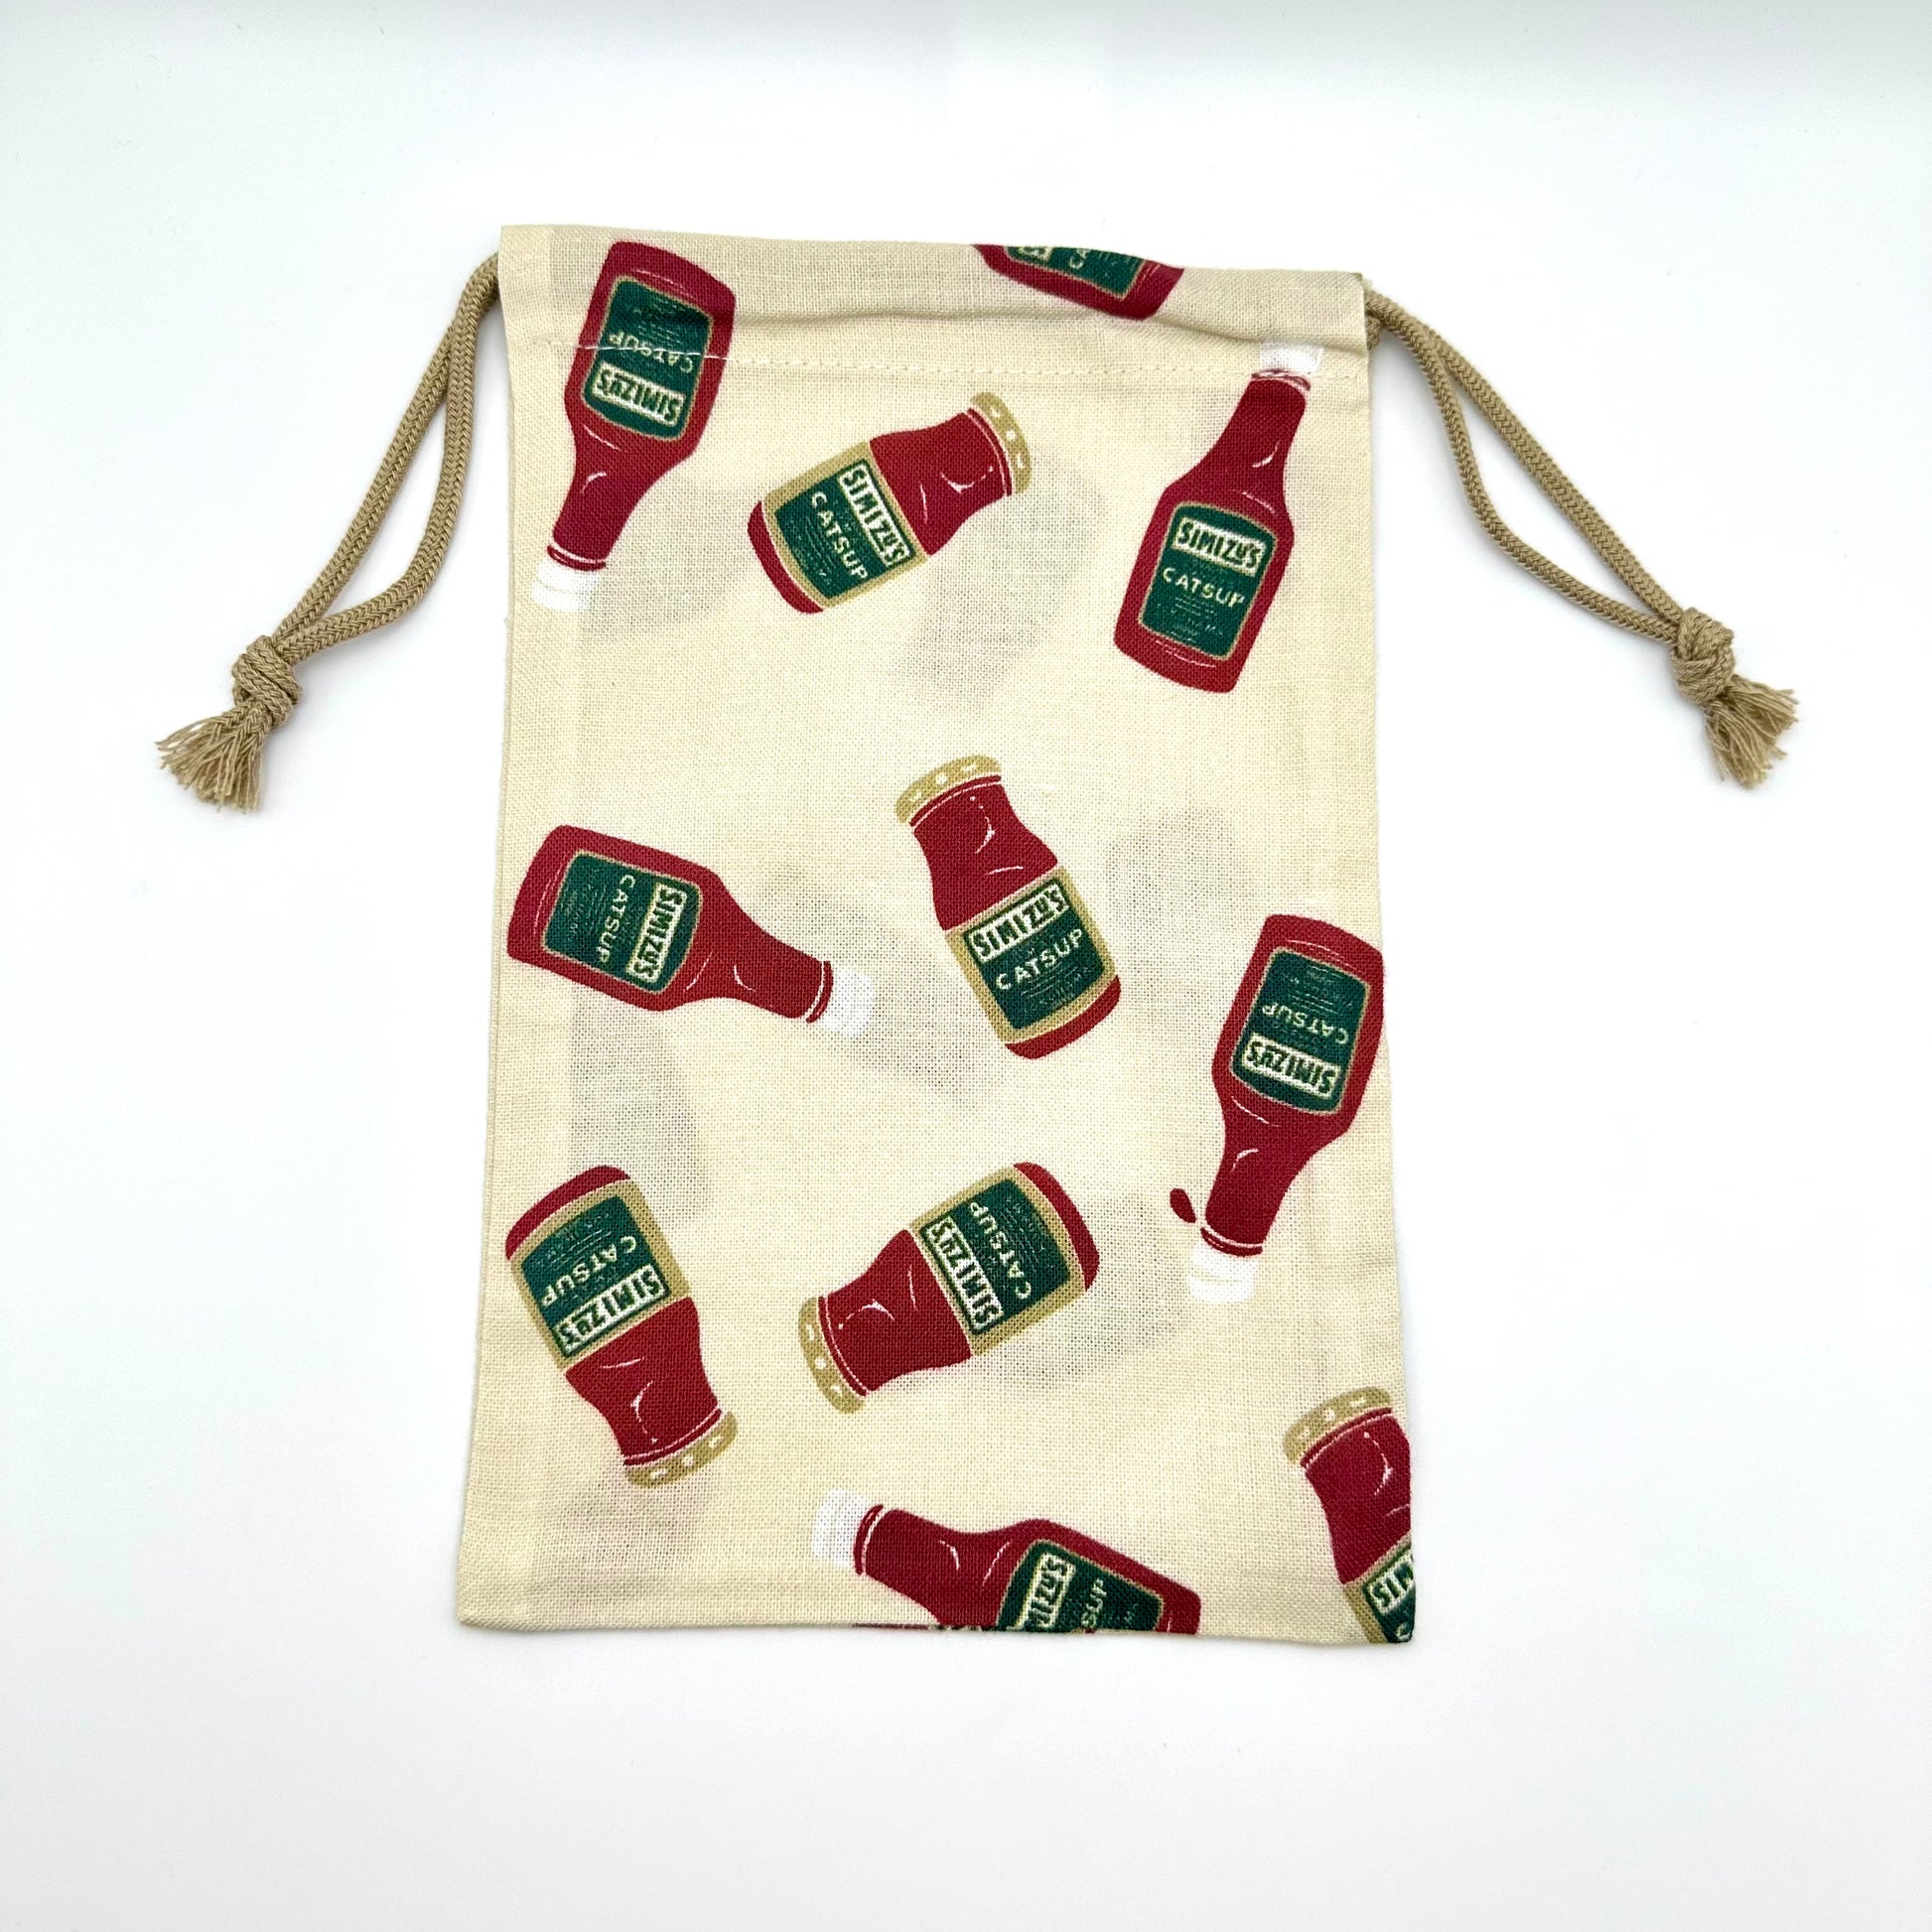 Drawstring pouch with assorted catsup bottles all over it.  